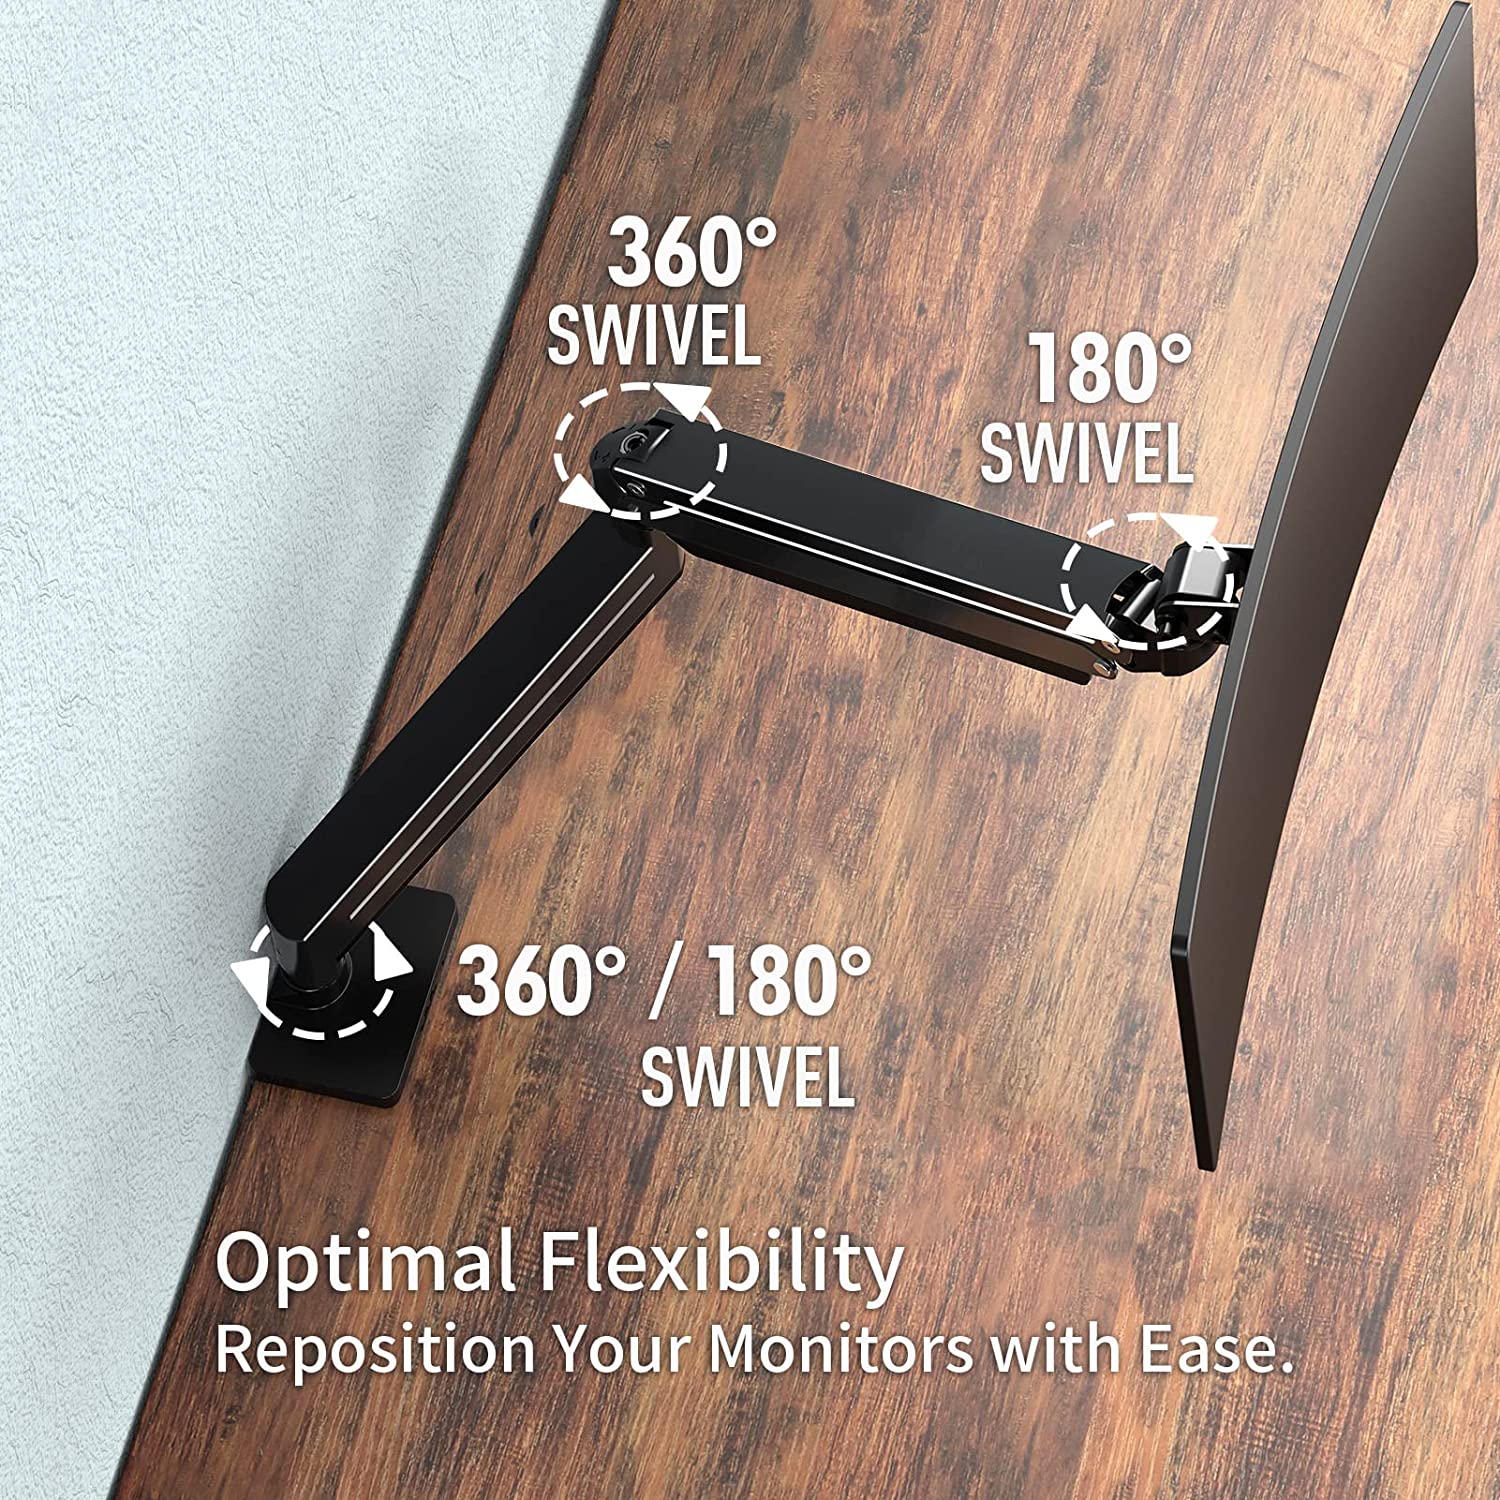 full motion single monitor arm provides optimal viewing flexibility